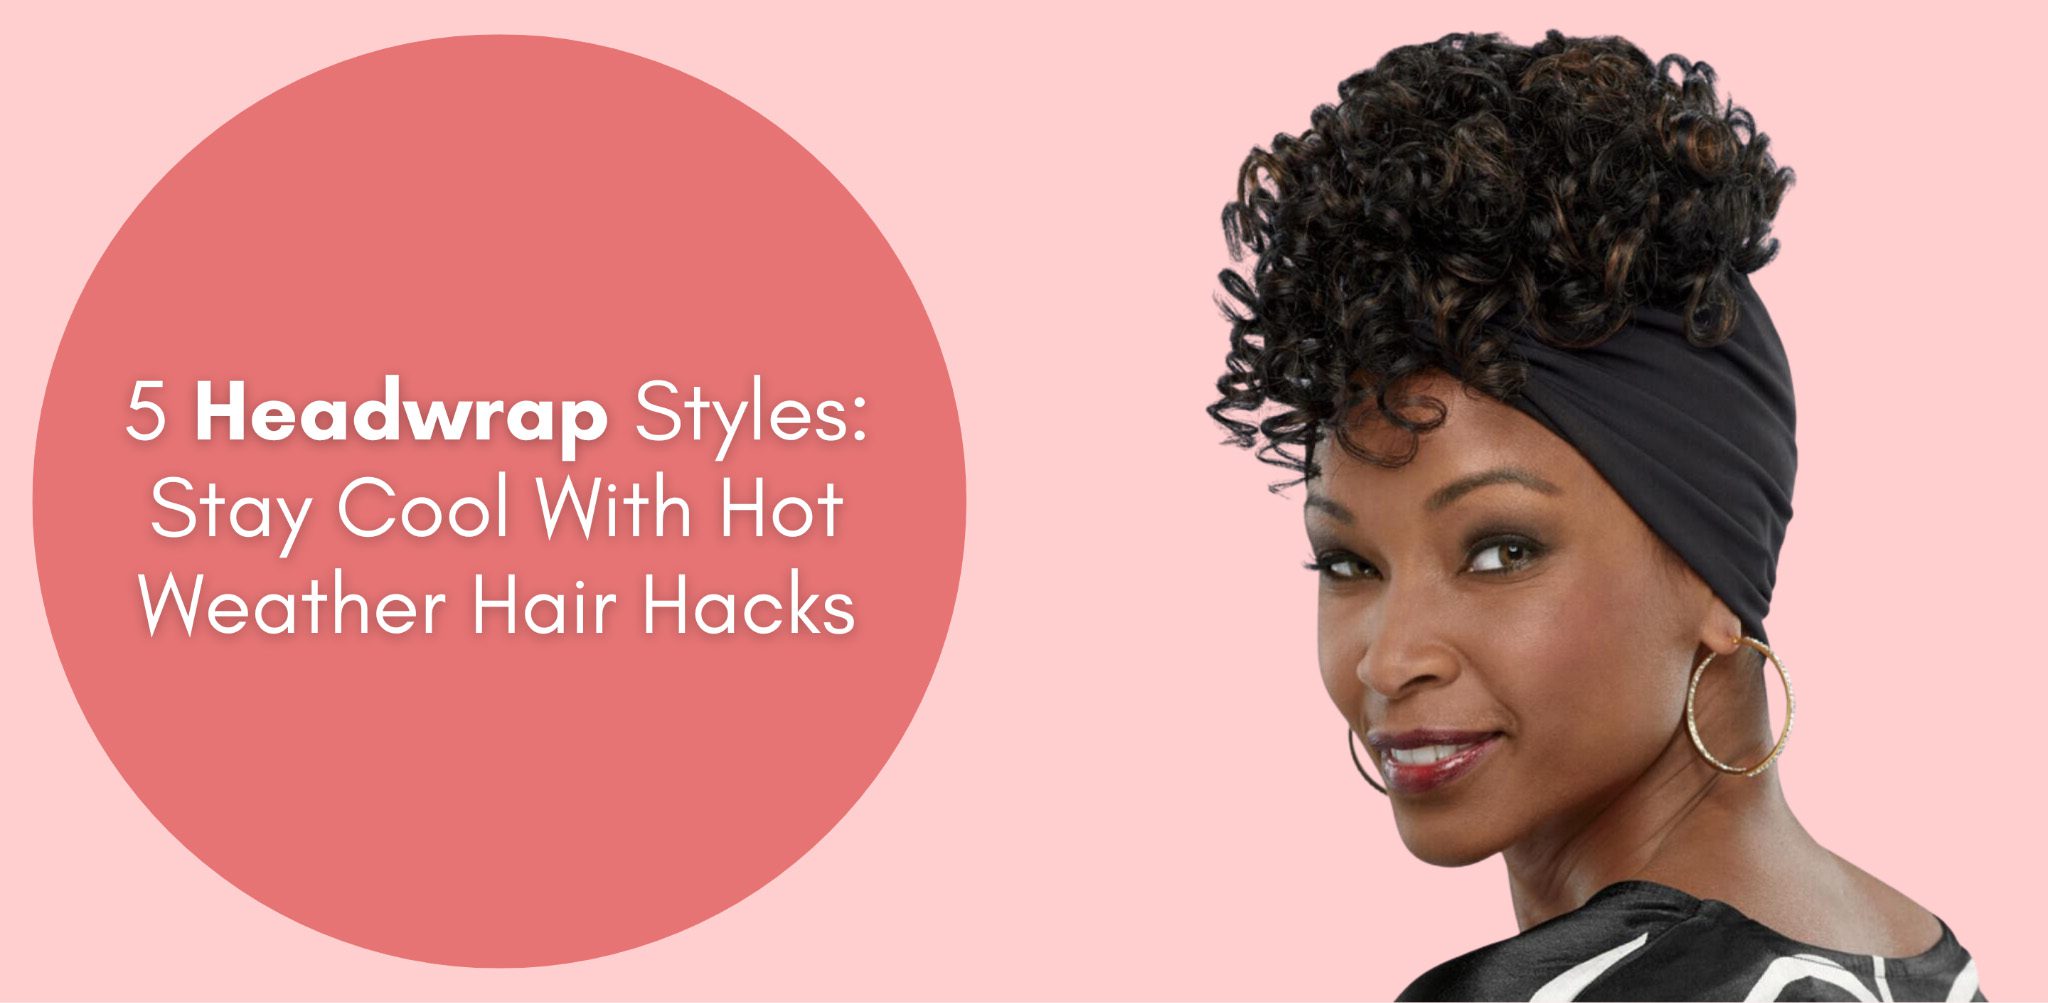 5 Headwrap Styles: Stay Cool With Hot Weather Hair Hacks